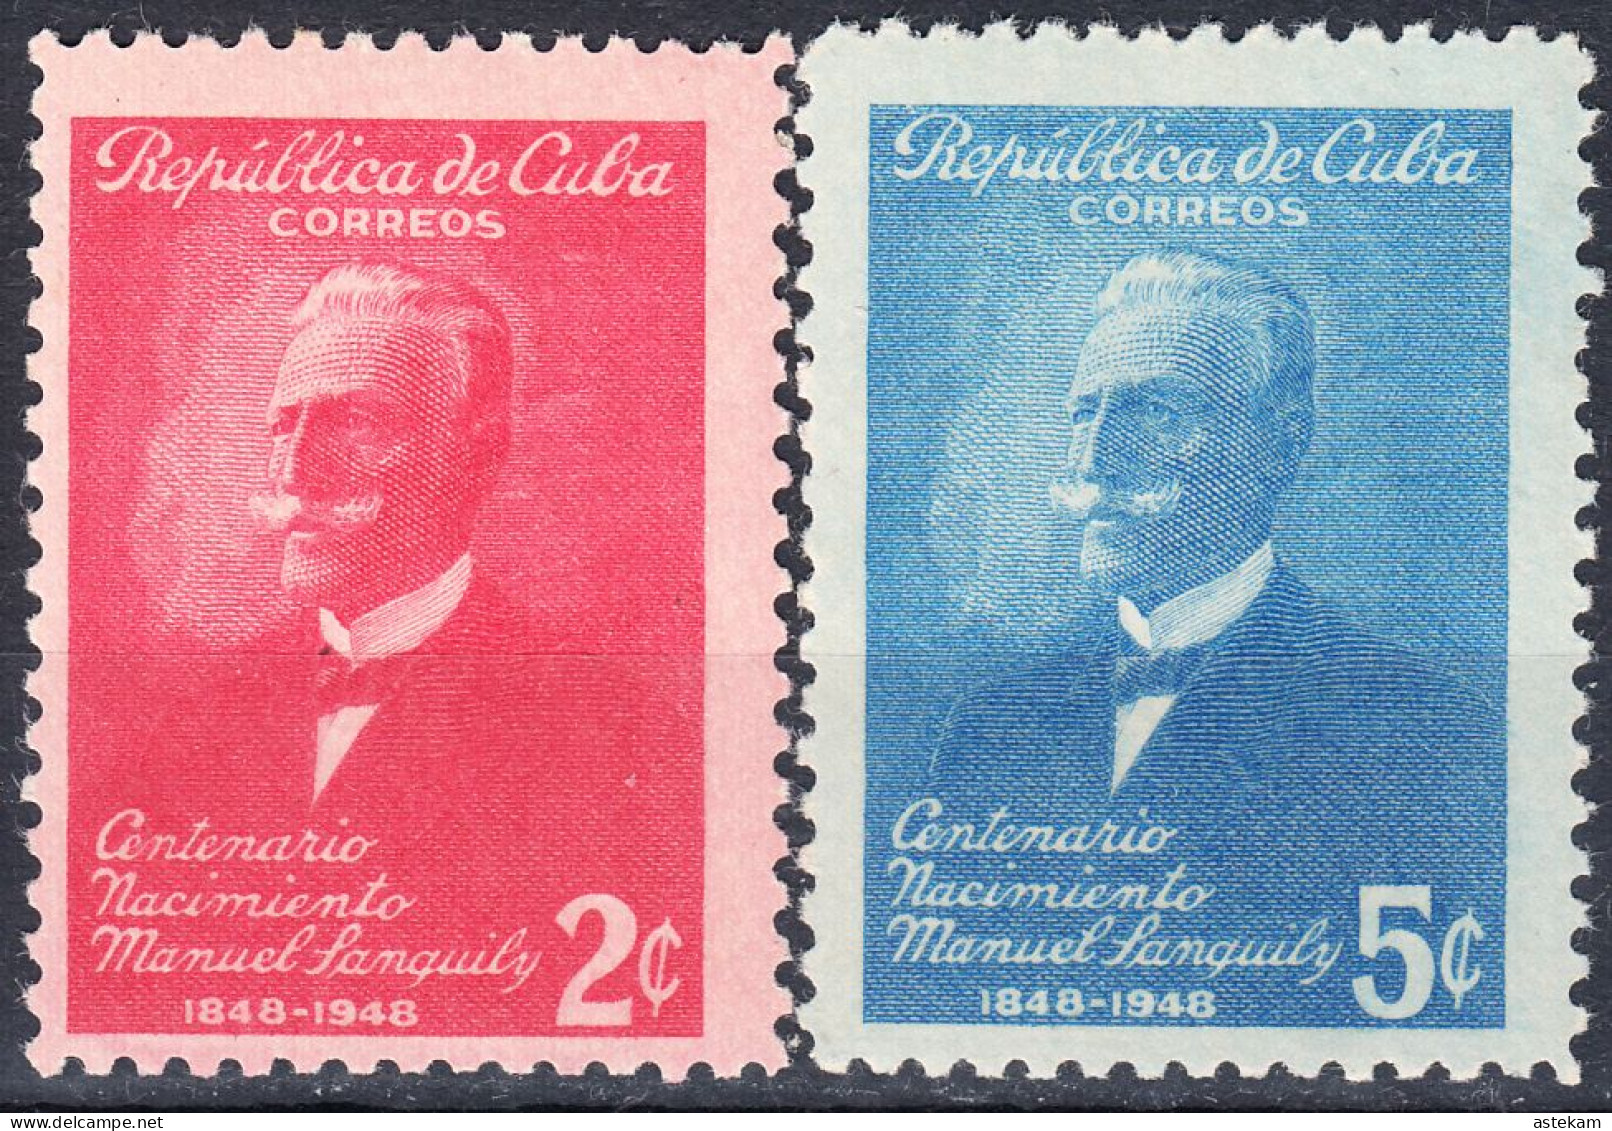 CUBA 1949, 100 YEARS From The BIRTH Of MANUEL SANGUILY-POET, COMPLETE, MNH SERIES With GOOD QUALITY, *** - Neufs